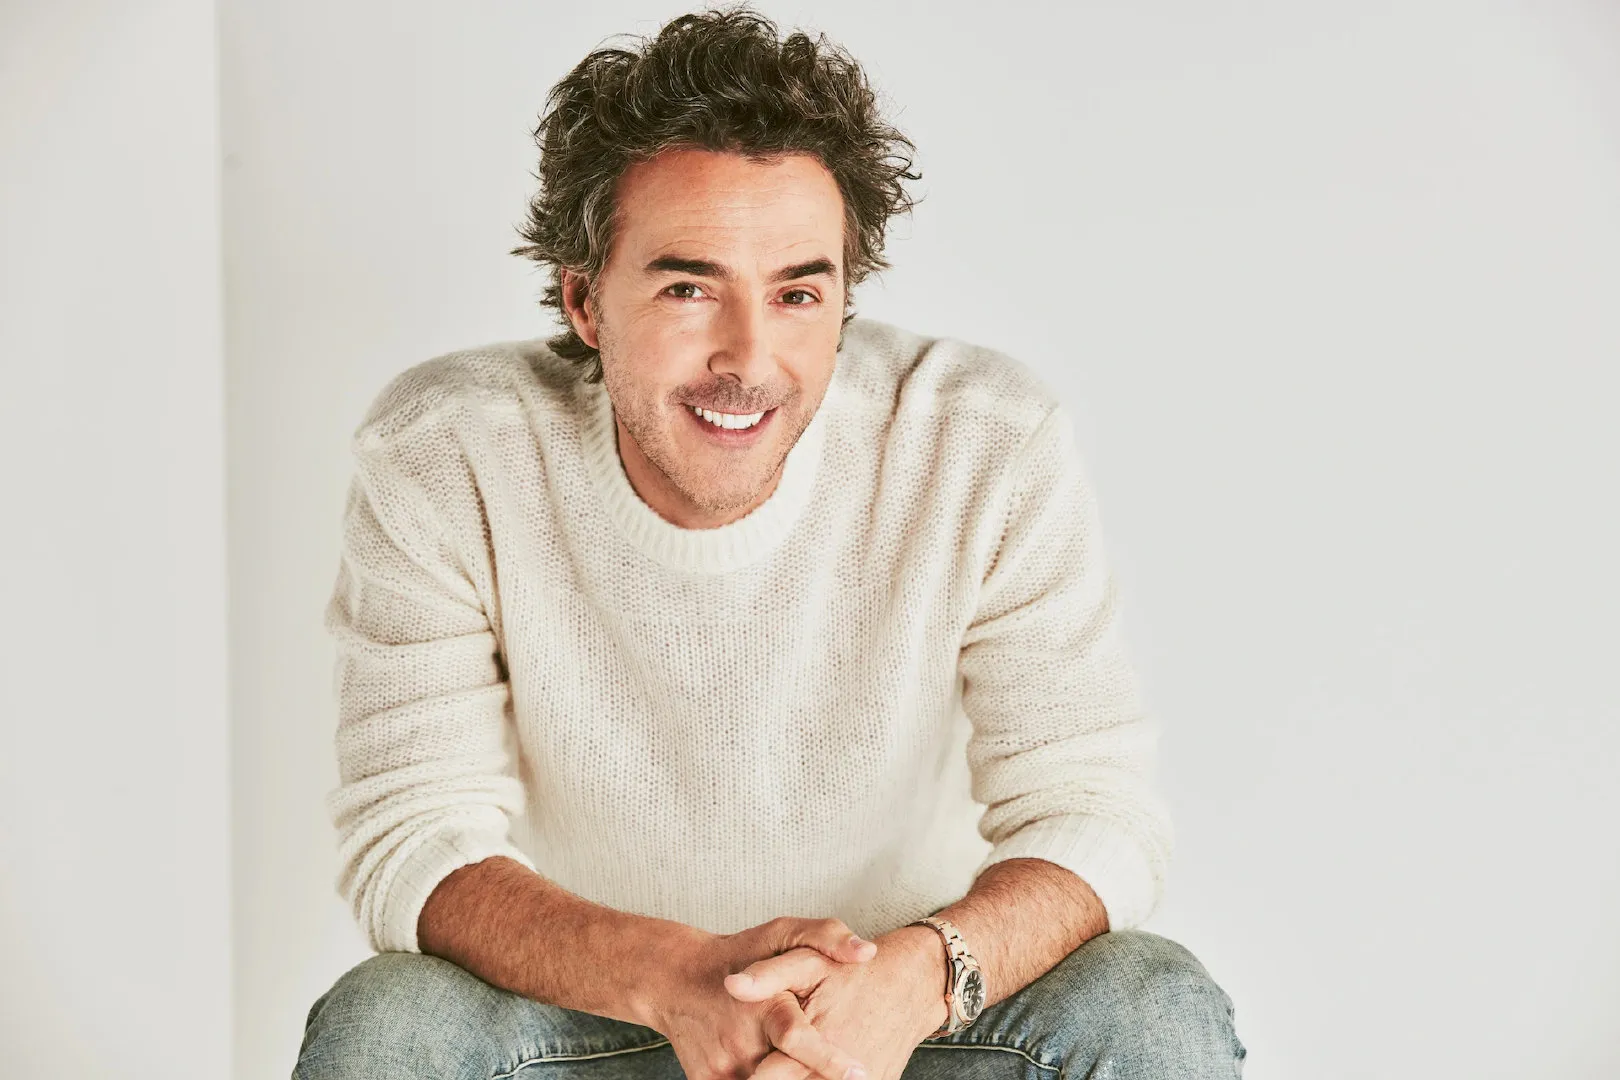 Shawn Levy in talks to direct a new 'Star Wars' film | FMV6